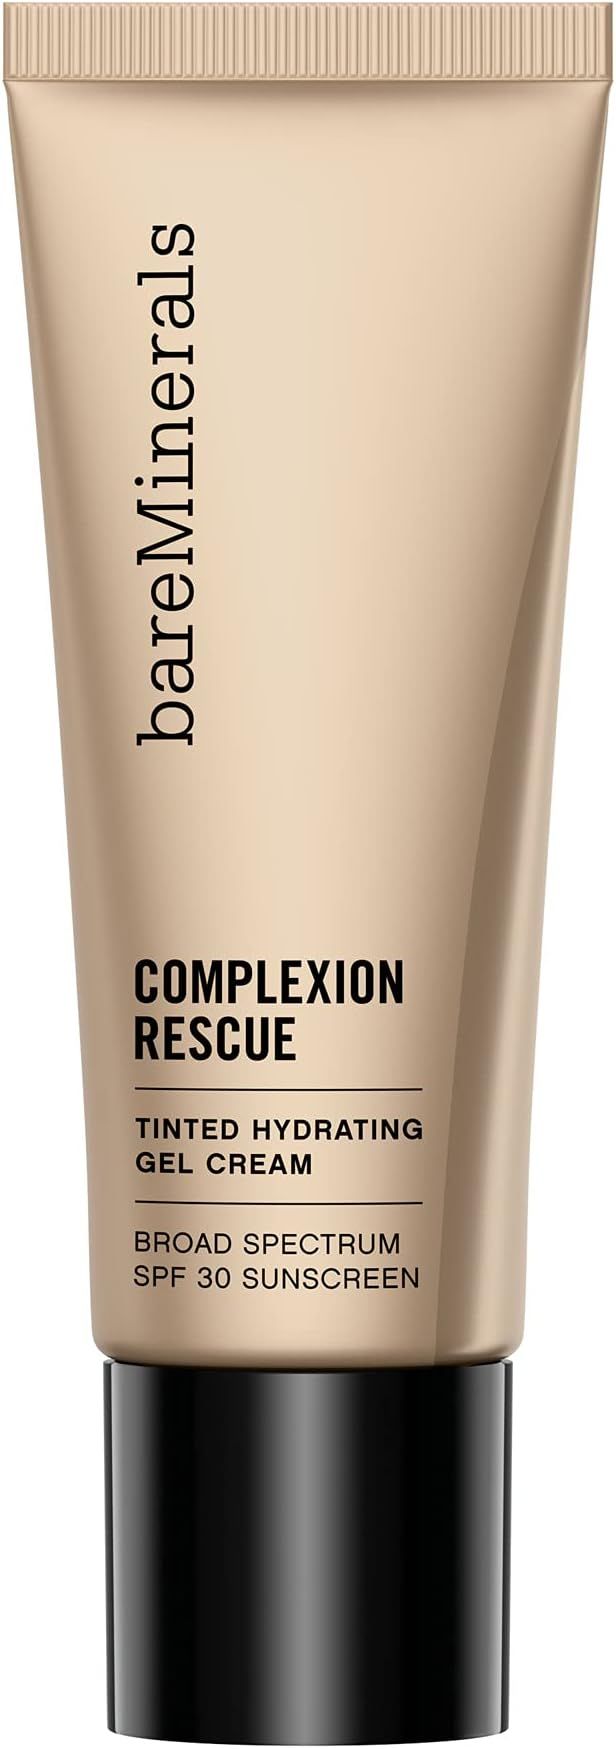 bareMinerals COMPLEXION RESCUE Tinted Hydrating Gel Cream Broad Spectrum SPF 30, Opal 01, 35ml | Amazon (US)